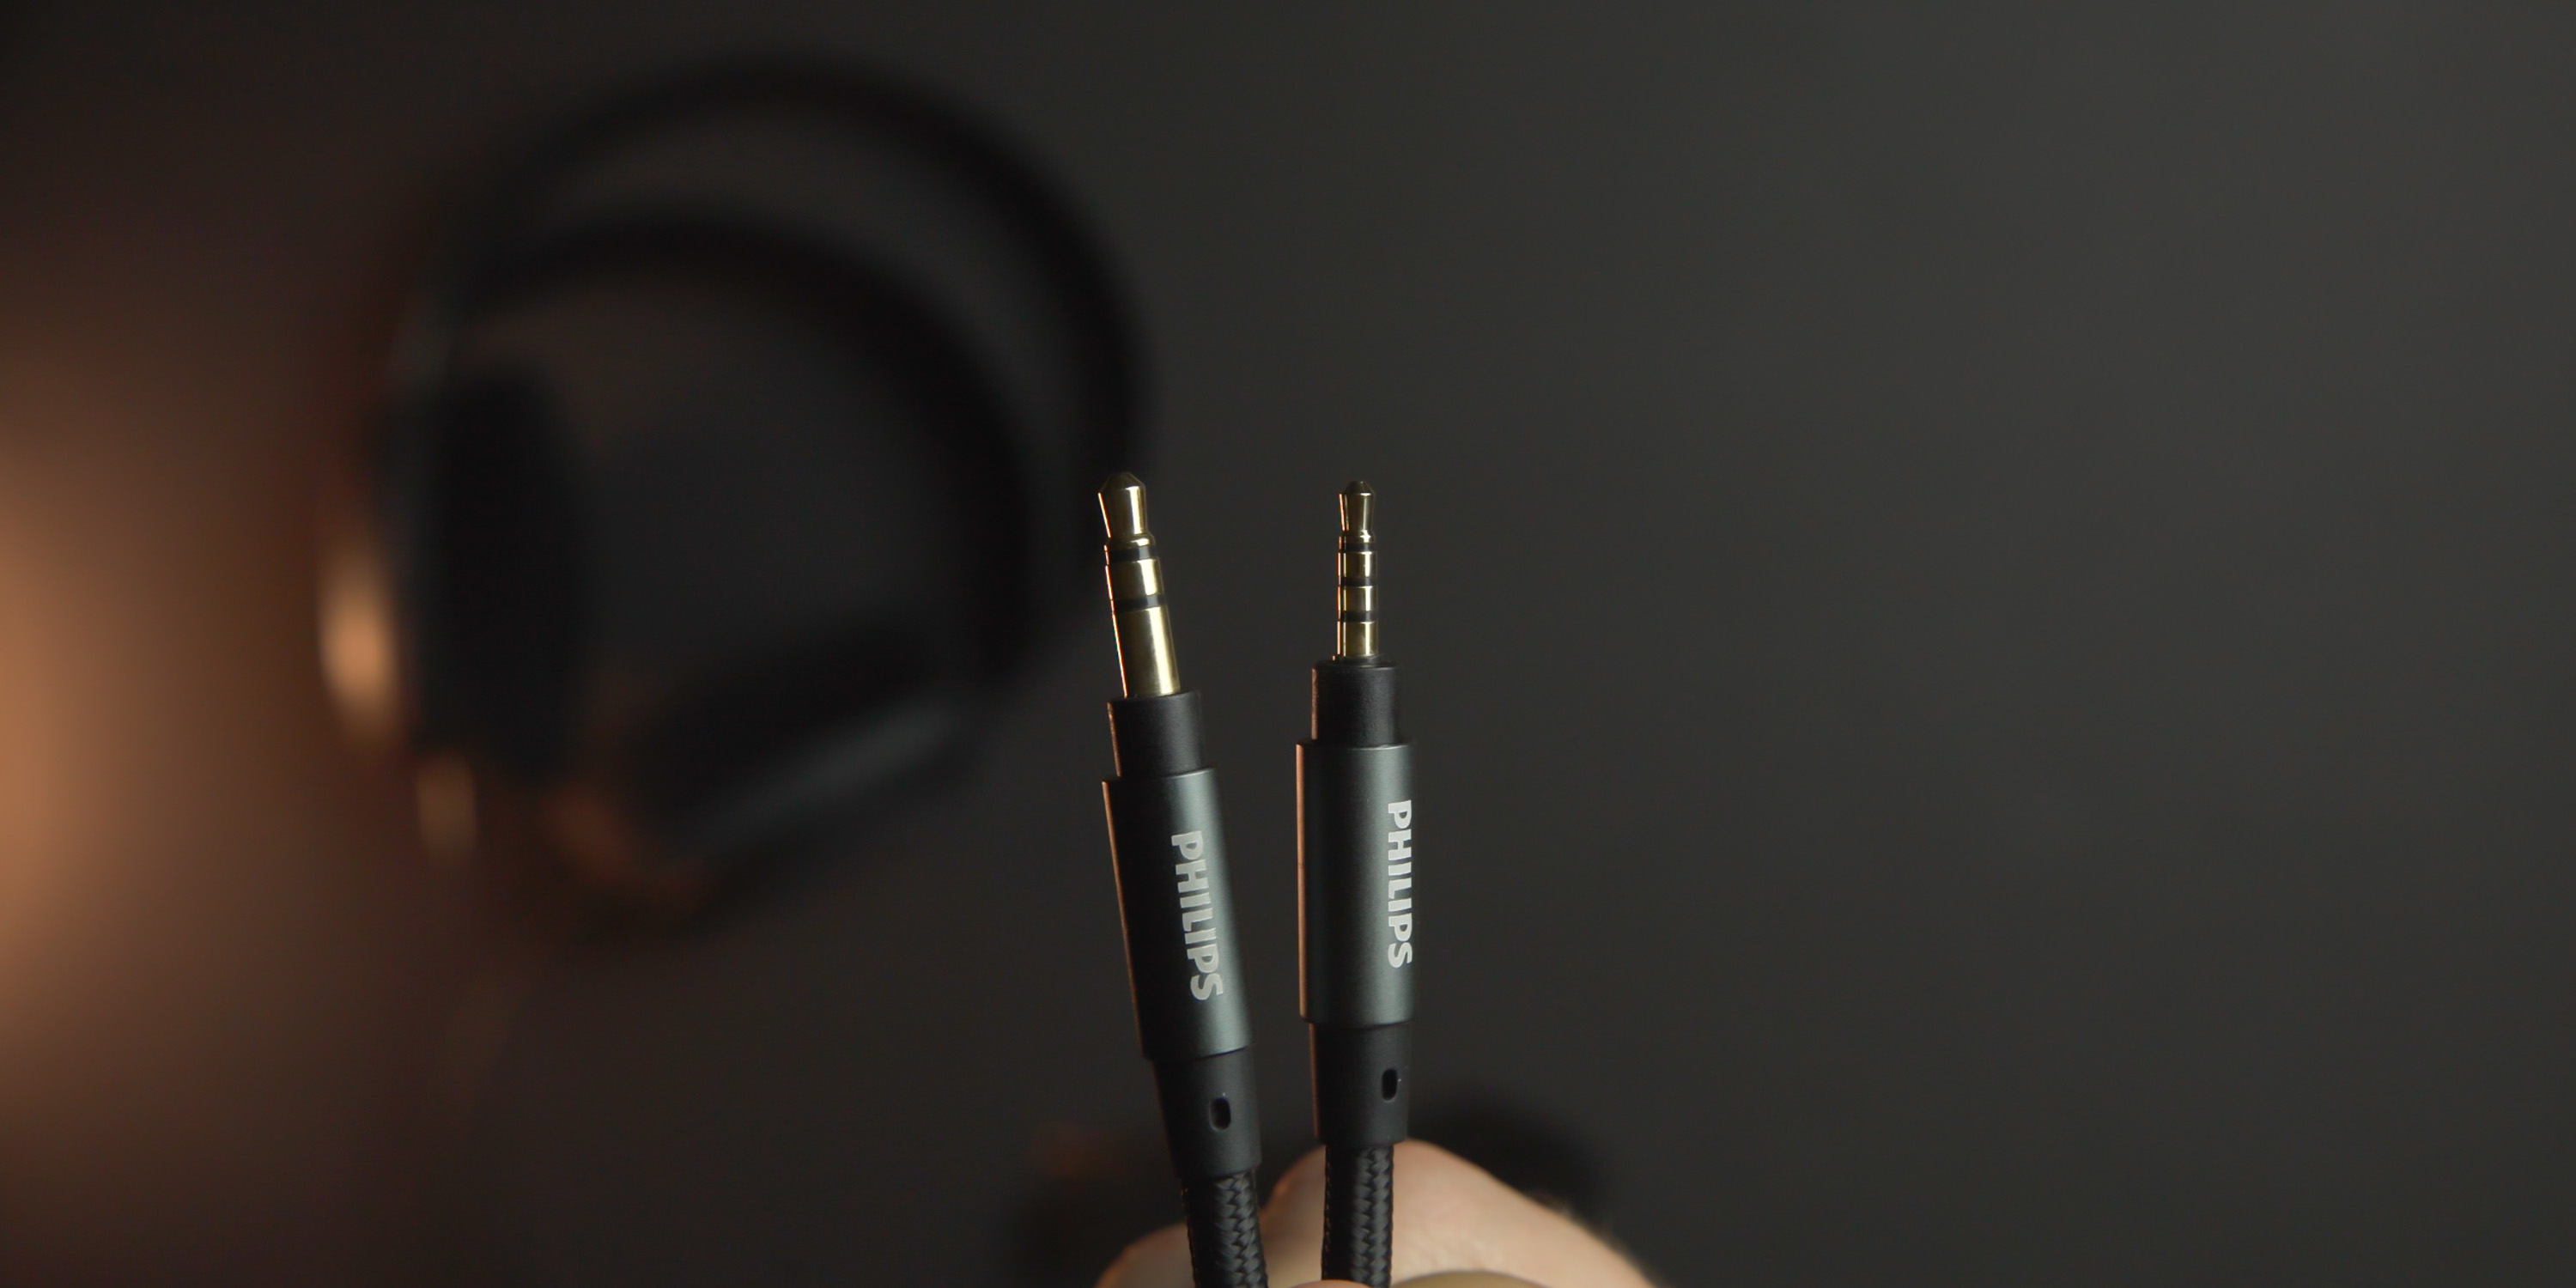 The Fidelio X3 comes with detachable 3.5mm and 2.5 TRRS cables.